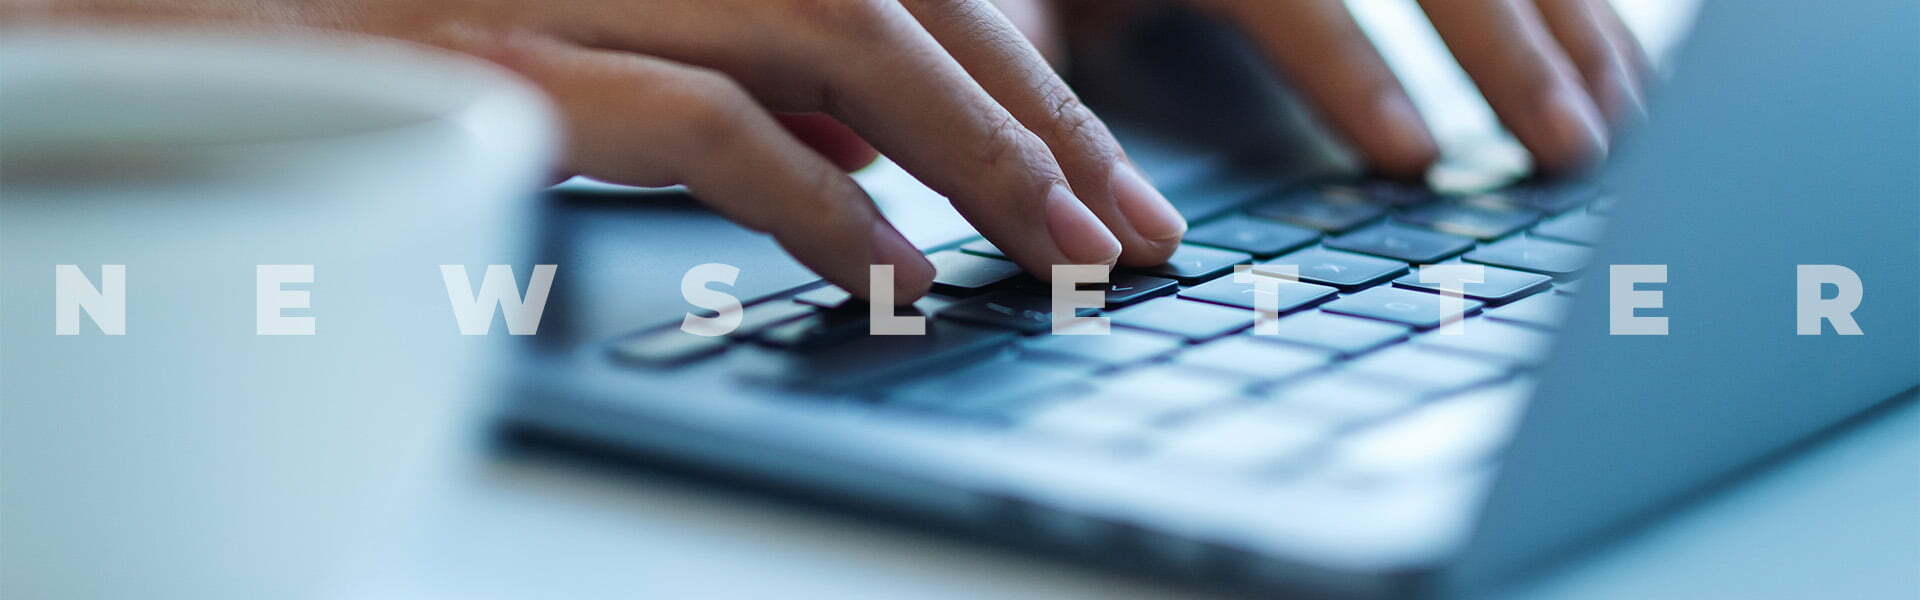 Closeup of a person typing on a laptop with text that says "Newsletter."